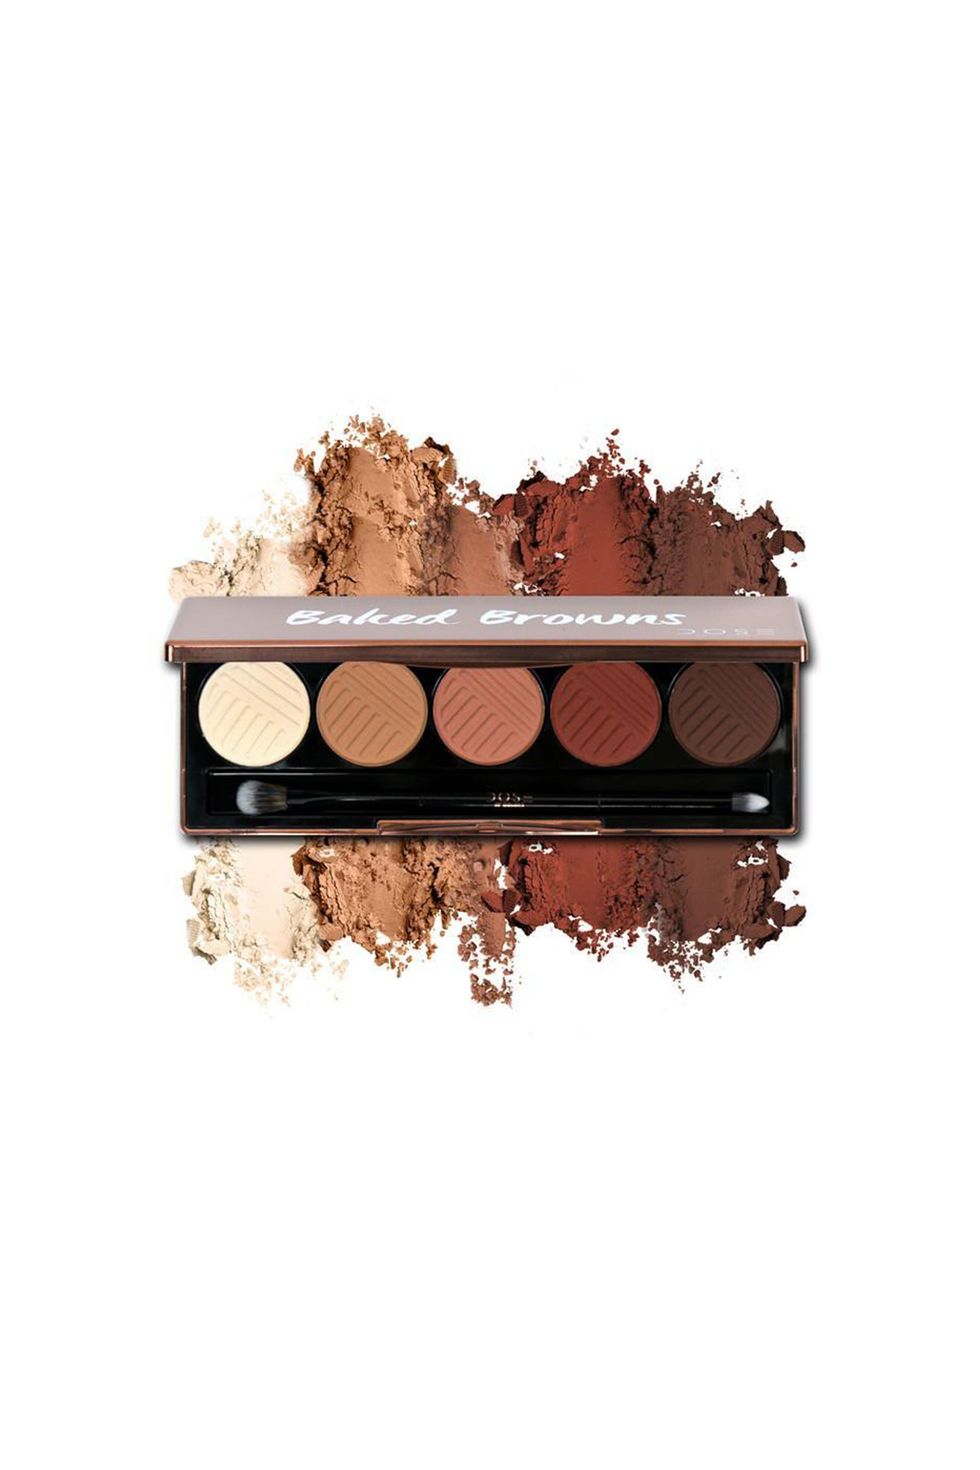 Baked Browns Eyeshadow Palette in Outdoorsy and Deserted 